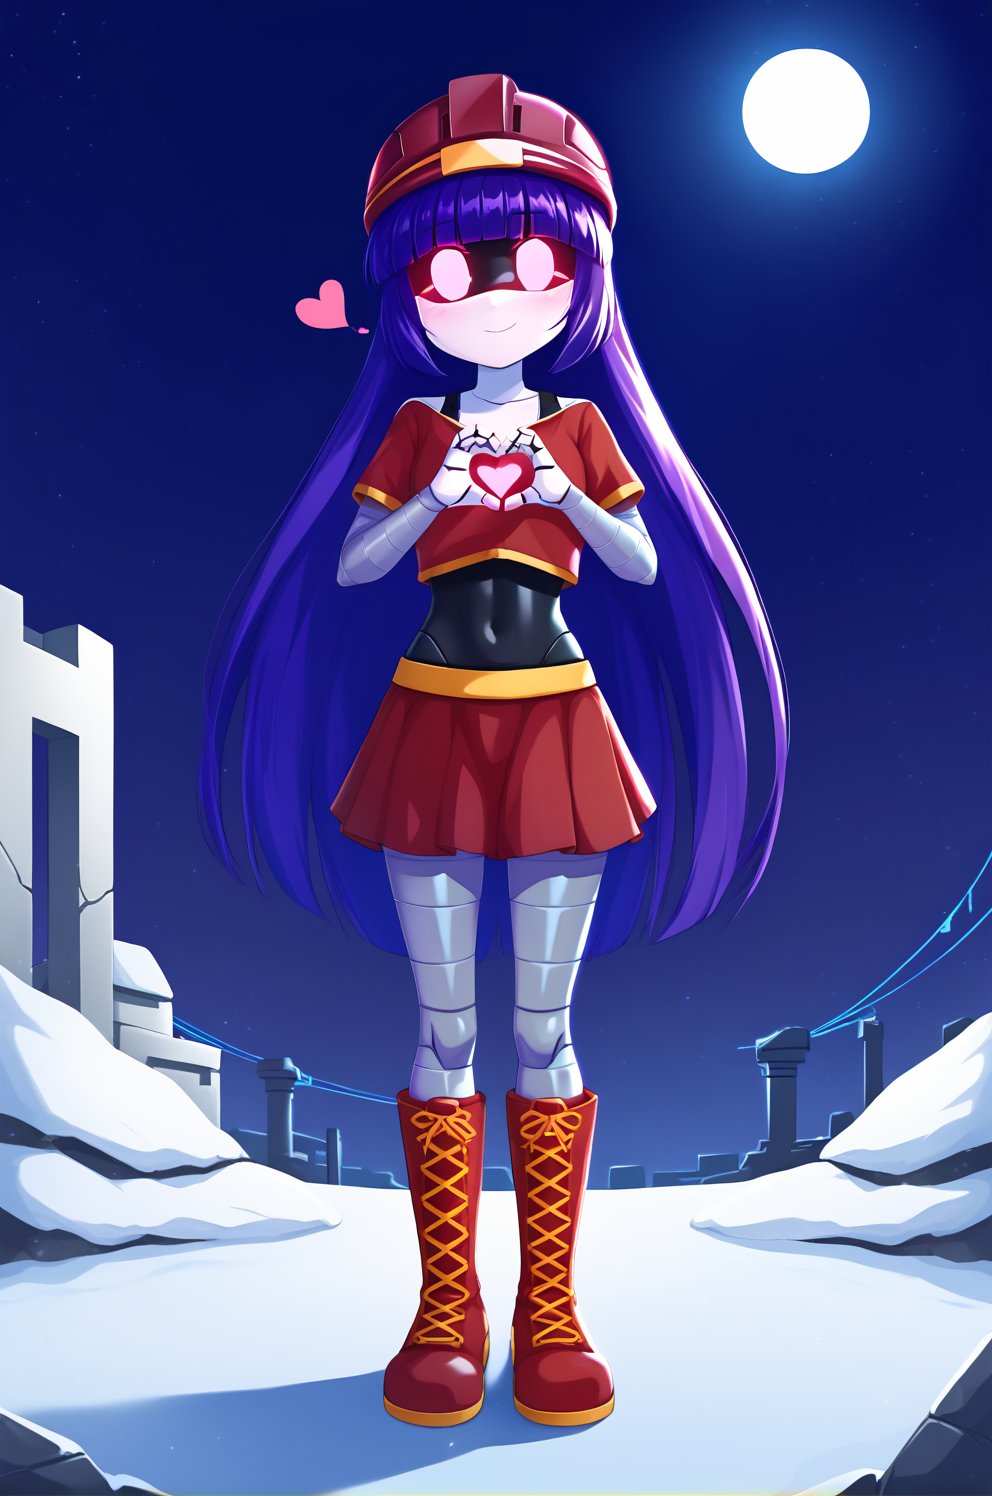 score_9, score_8_up, score_7_up, source_anime, 
BREAK, 
MD-Doll, 1girl, solo, android, red helmet, long purple hair, red crop top, black tank top, red skirt, red boots, robot, joints, mechanical arms, mechanical legs, 
BREAK, 
heart_hands, hands doing a heart, looking at viewer, standing, full body, 
BREAK, 
outdoors, city, ruins, snow, night, dark, 
(cinematic lighting, dramatic lighting, dark lighting), 
BREAK, 
masterpiece, epic, brutal, best quality